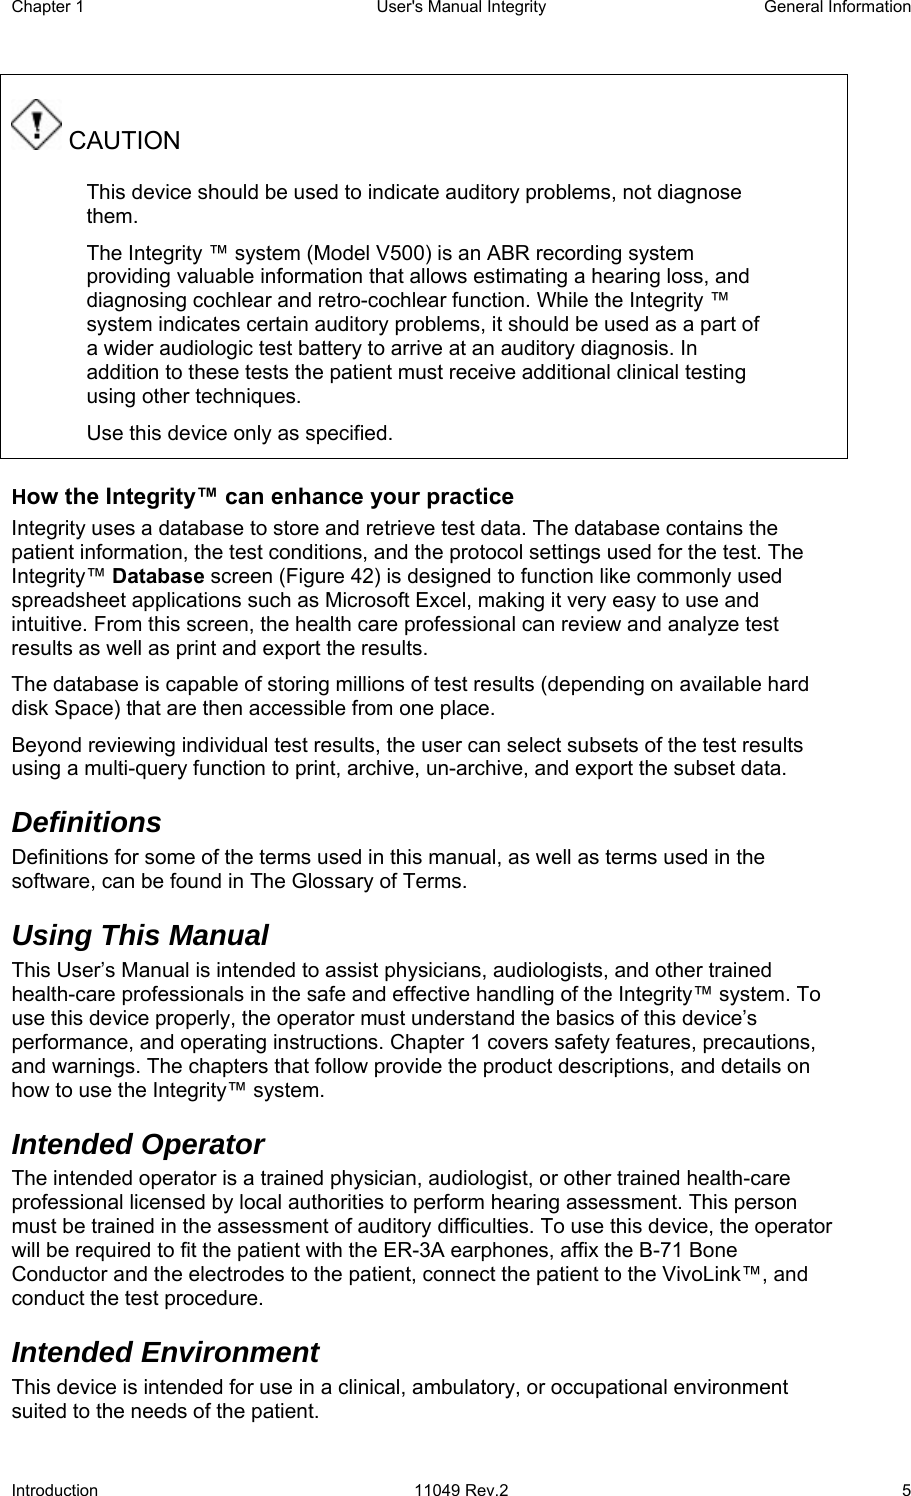 Chapter 1  User&apos;s Manual Integrity  General Information Introduction 11049 Rev.2  5  CAUTION This device should be used to indicate auditory problems, not diagnose them. The Integrity ™ system (Model V500) is an ABR recording system providing valuable information that allows estimating a hearing loss, and diagnosing cochlear and retro-cochlear function. While the Integrity ™ system indicates certain auditory problems, it should be used as a part of a wider audiologic test battery to arrive at an auditory diagnosis. In addition to these tests the patient must receive additional clinical testing using other techniques.  Use this device only as specified. How the Integrity™ can enhance your practice Integrity uses a database to store and retrieve test data. The database contains the patient information, the test conditions, and the protocol settings used for the test. The Integrity™ Database screen (Figure 42) is designed to function like commonly used spreadsheet applications such as Microsoft Excel, making it very easy to use and intuitive. From this screen, the health care professional can review and analyze test results as well as print and export the results. The database is capable of storing millions of test results (depending on available hard disk Space) that are then accessible from one place. Beyond reviewing individual test results, the user can select subsets of the test results using a multi-query function to print, archive, un-archive, and export the subset data. Definitions Definitions for some of the terms used in this manual, as well as terms used in the software, can be found in The Glossary of Terms.  Using This Manual  This User’s Manual is intended to assist physicians, audiologists, and other trained health-care professionals in the safe and effective handling of the Integrity™ system. To use this device properly, the operator must understand the basics of this device’s performance, and operating instructions. Chapter 1 covers safety features, precautions, and warnings. The chapters that follow provide the product descriptions, and details on how to use the Integrity™ system. Intended Operator The intended operator is a trained physician, audiologist, or other trained health-care professional licensed by local authorities to perform hearing assessment. This person must be trained in the assessment of auditory difficulties. To use this device, the operator will be required to fit the patient with the ER-3A earphones, affix the B-71 Bone Conductor and the electrodes to the patient, connect the patient to the VivoLink™, and conduct the test procedure. Intended Environment This device is intended for use in a clinical, ambulatory, or occupational environment suited to the needs of the patient. 